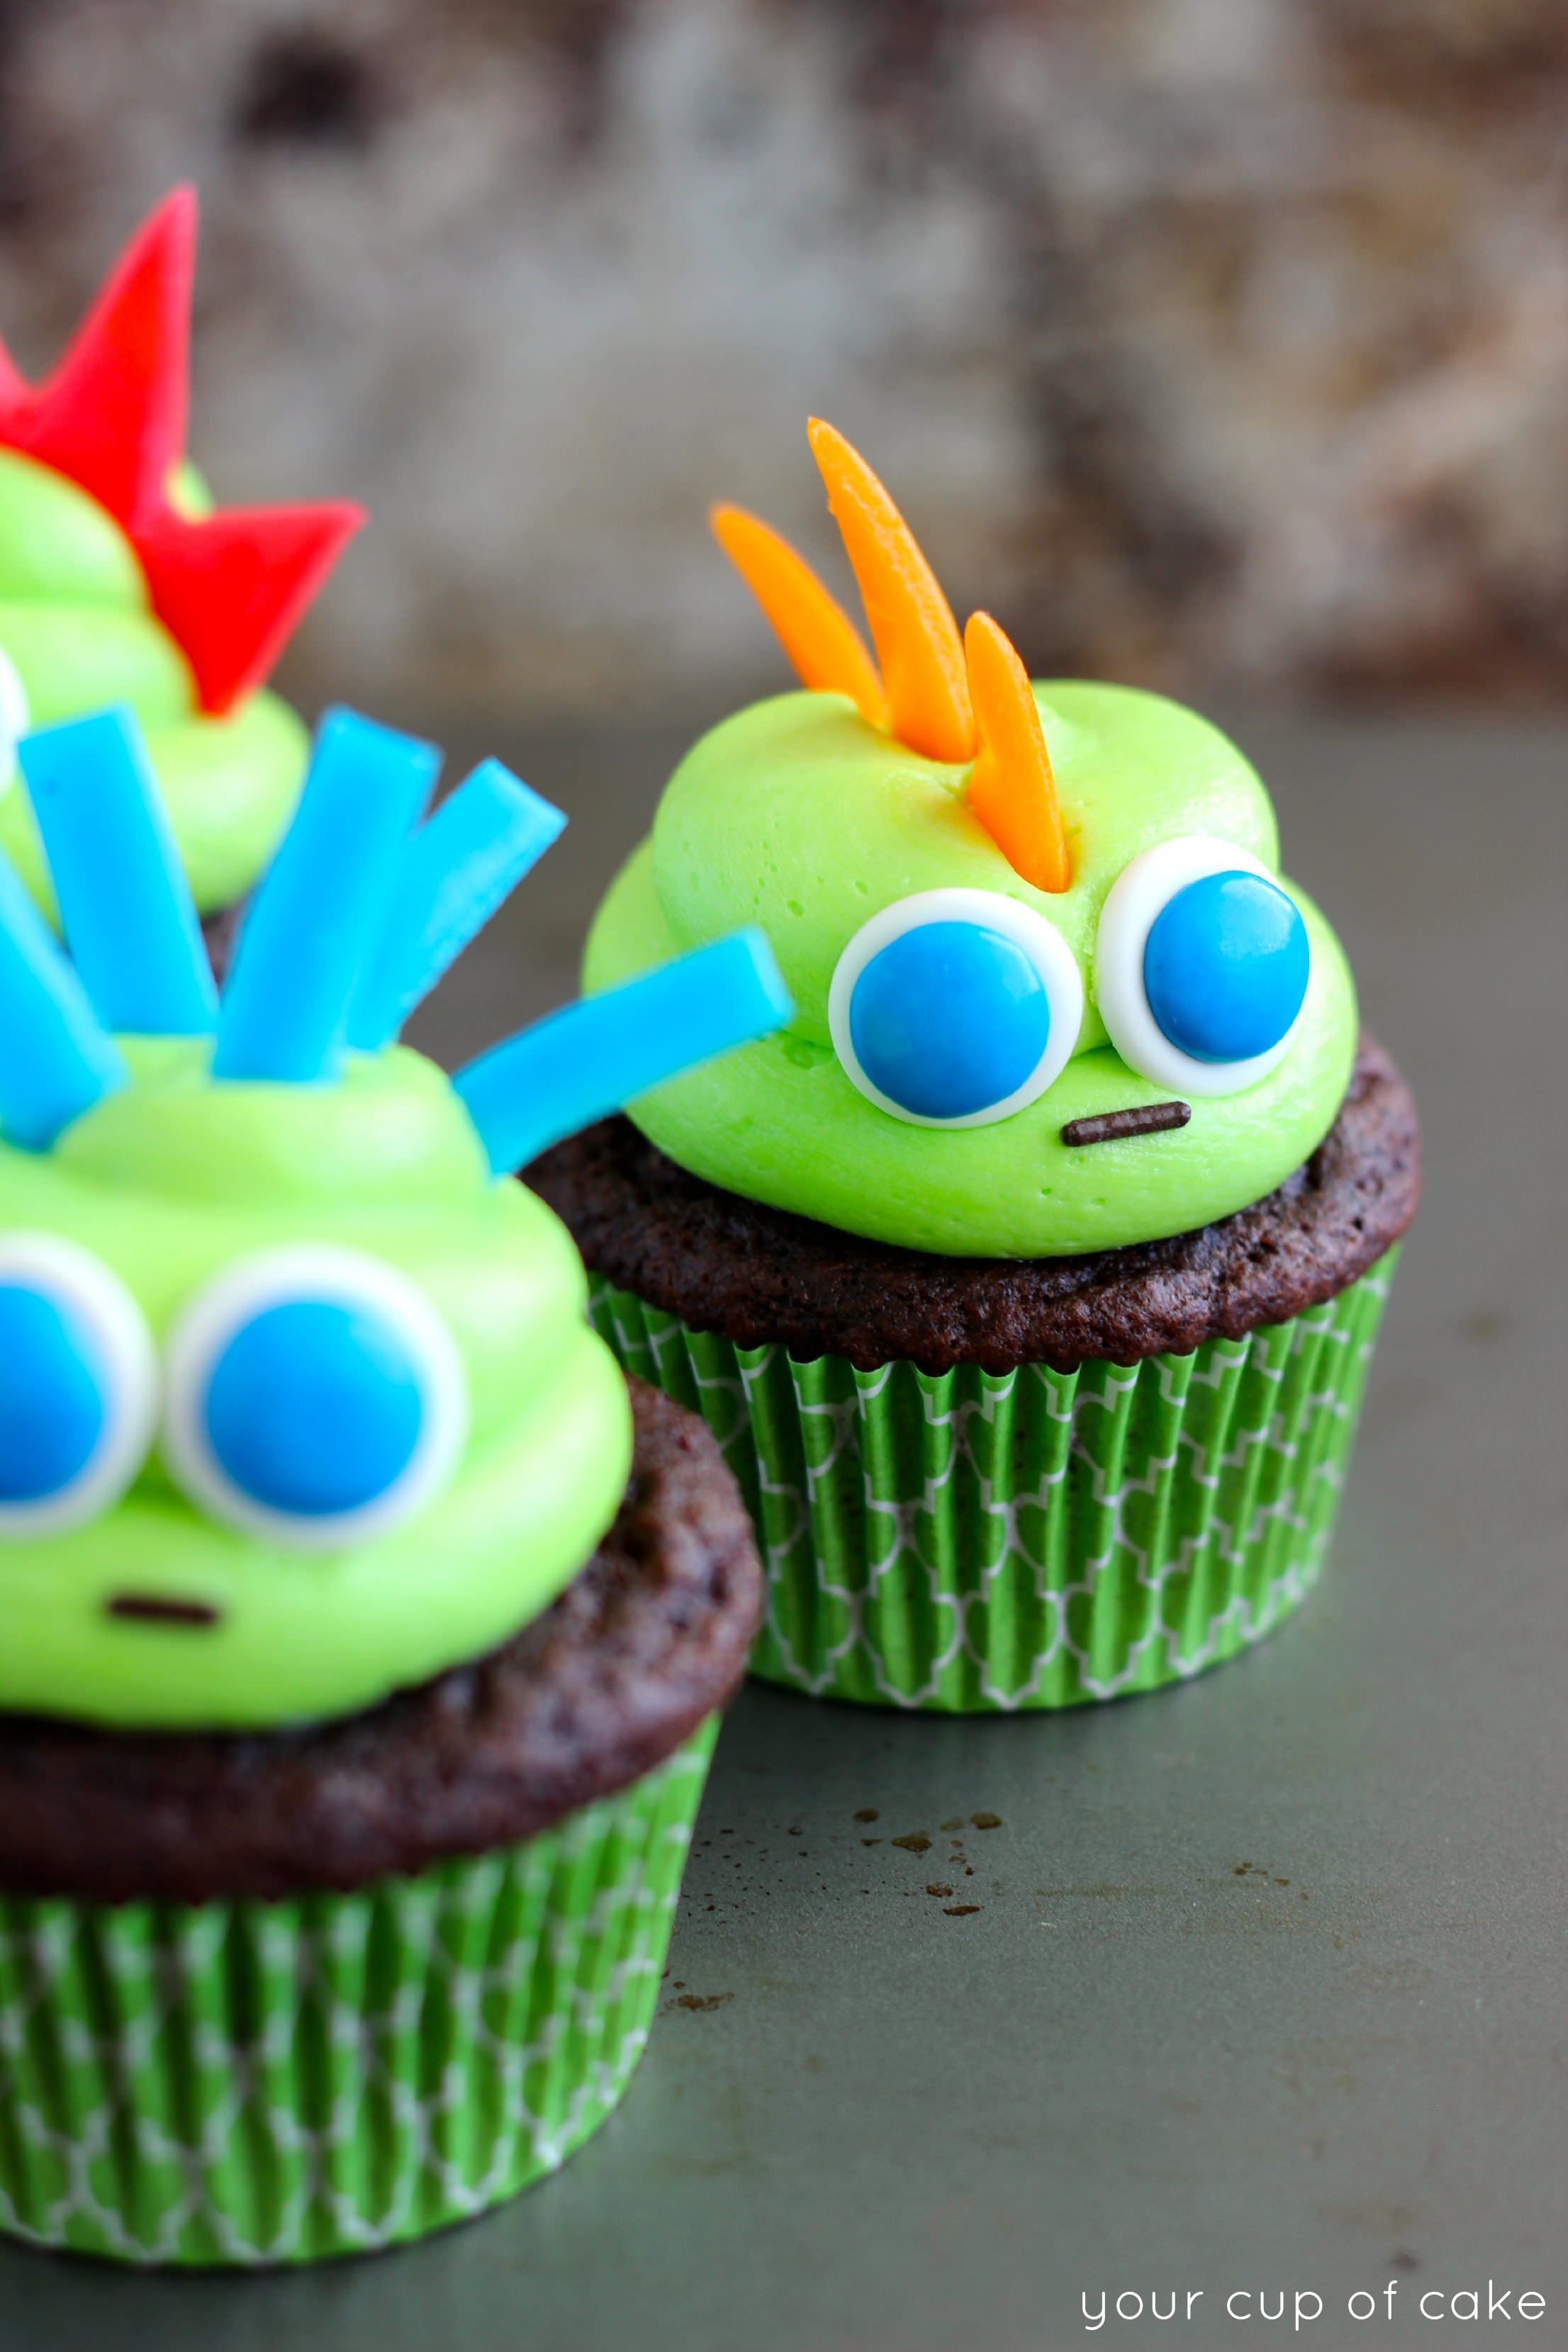 Cupcakes For Halloween
 Easy Halloween Cupcake Ideas Your Cup of Cake